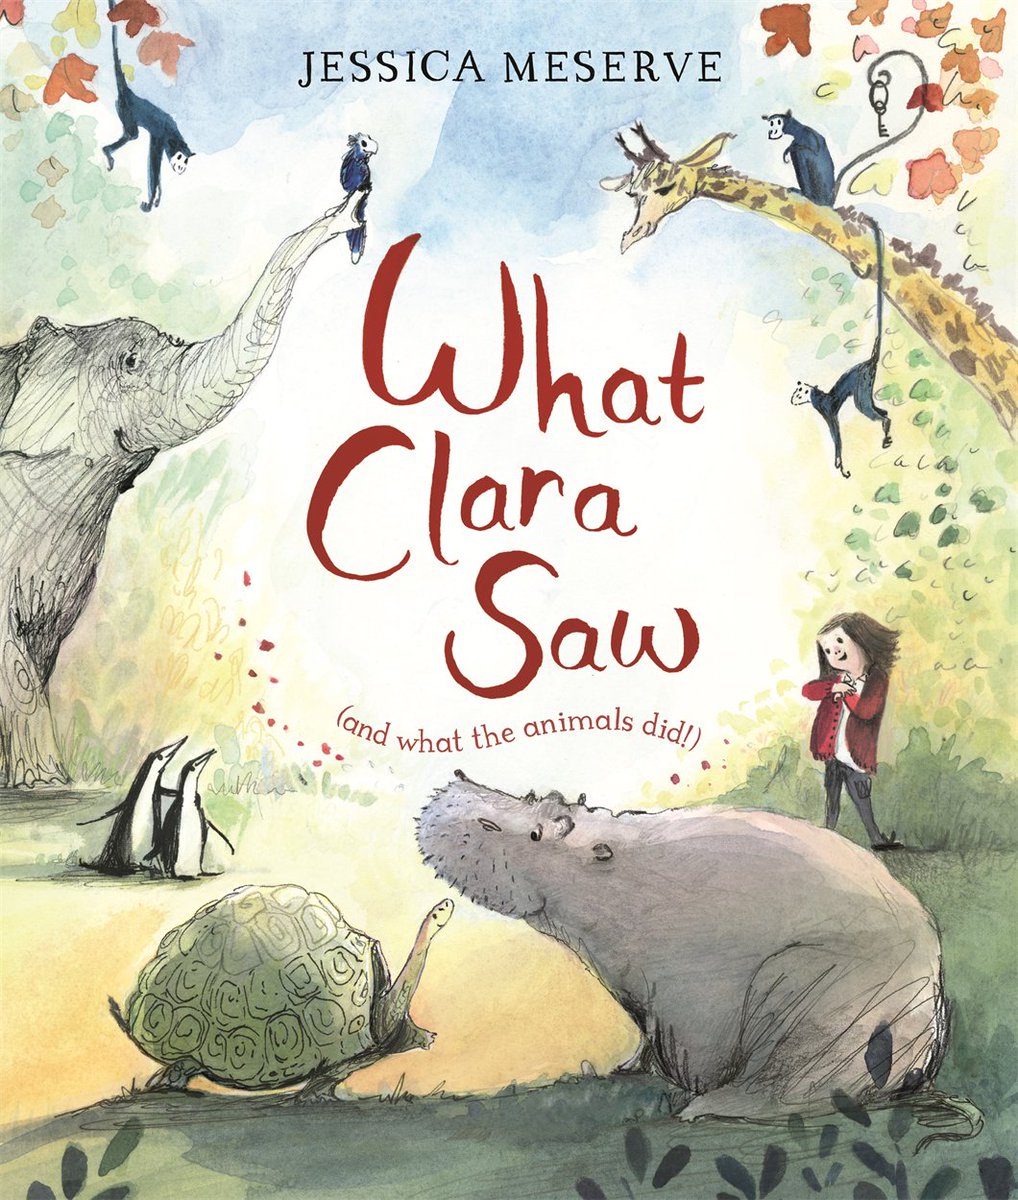 Can a chimp chat, or a tortoise feel teary? Do animals help each other? Mr Biggity says no, but young Clara isn’t so sure! Out today, this beautifully illustrated picture book by Jessica Meserve will make sure you never underestimate animals again!